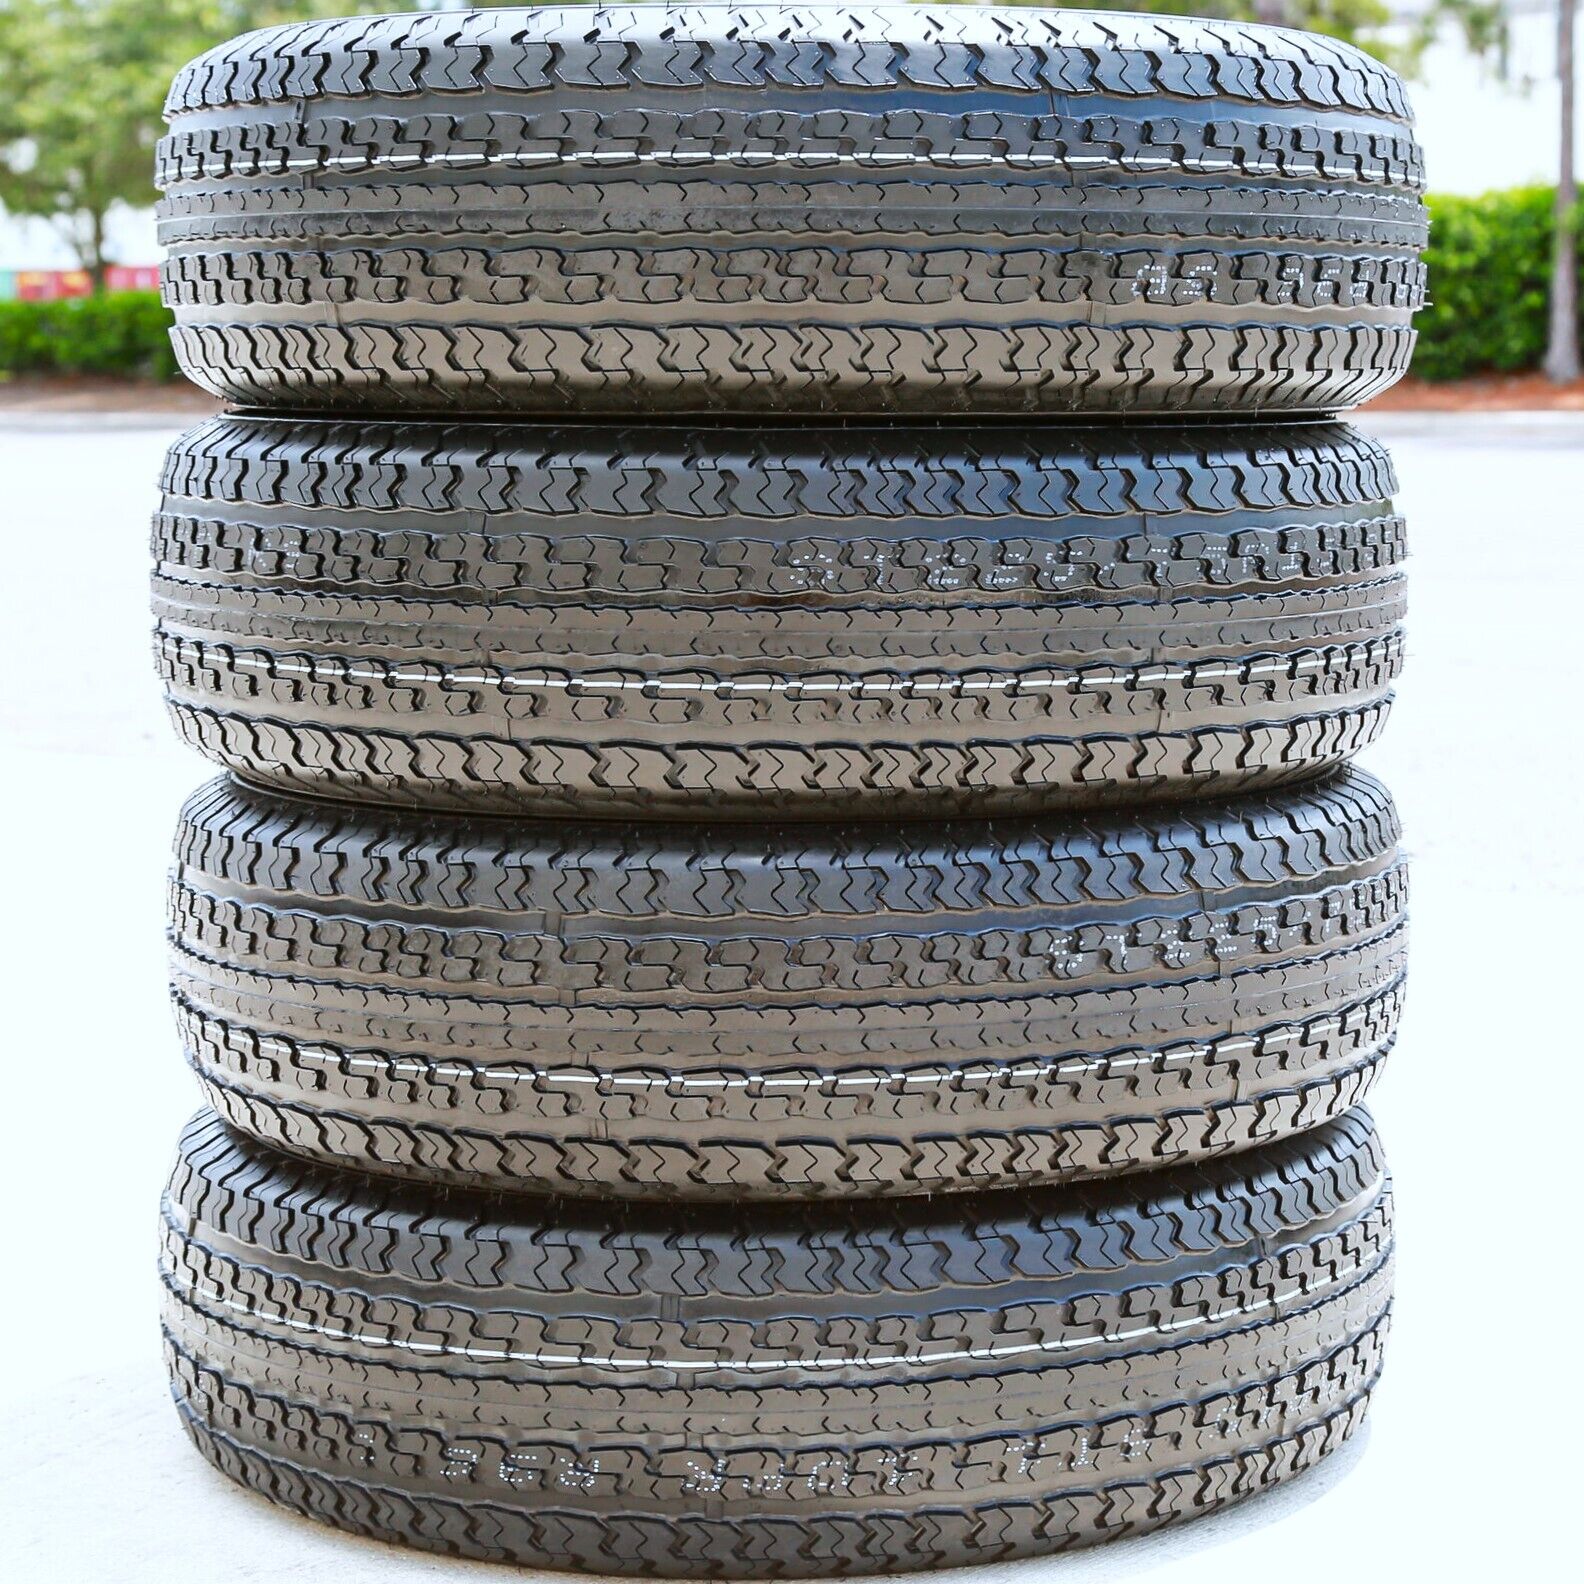 4 Tires Cargo Max YT301 Steel Belted ST 235/80R16 Load E 10 Ply Trailer